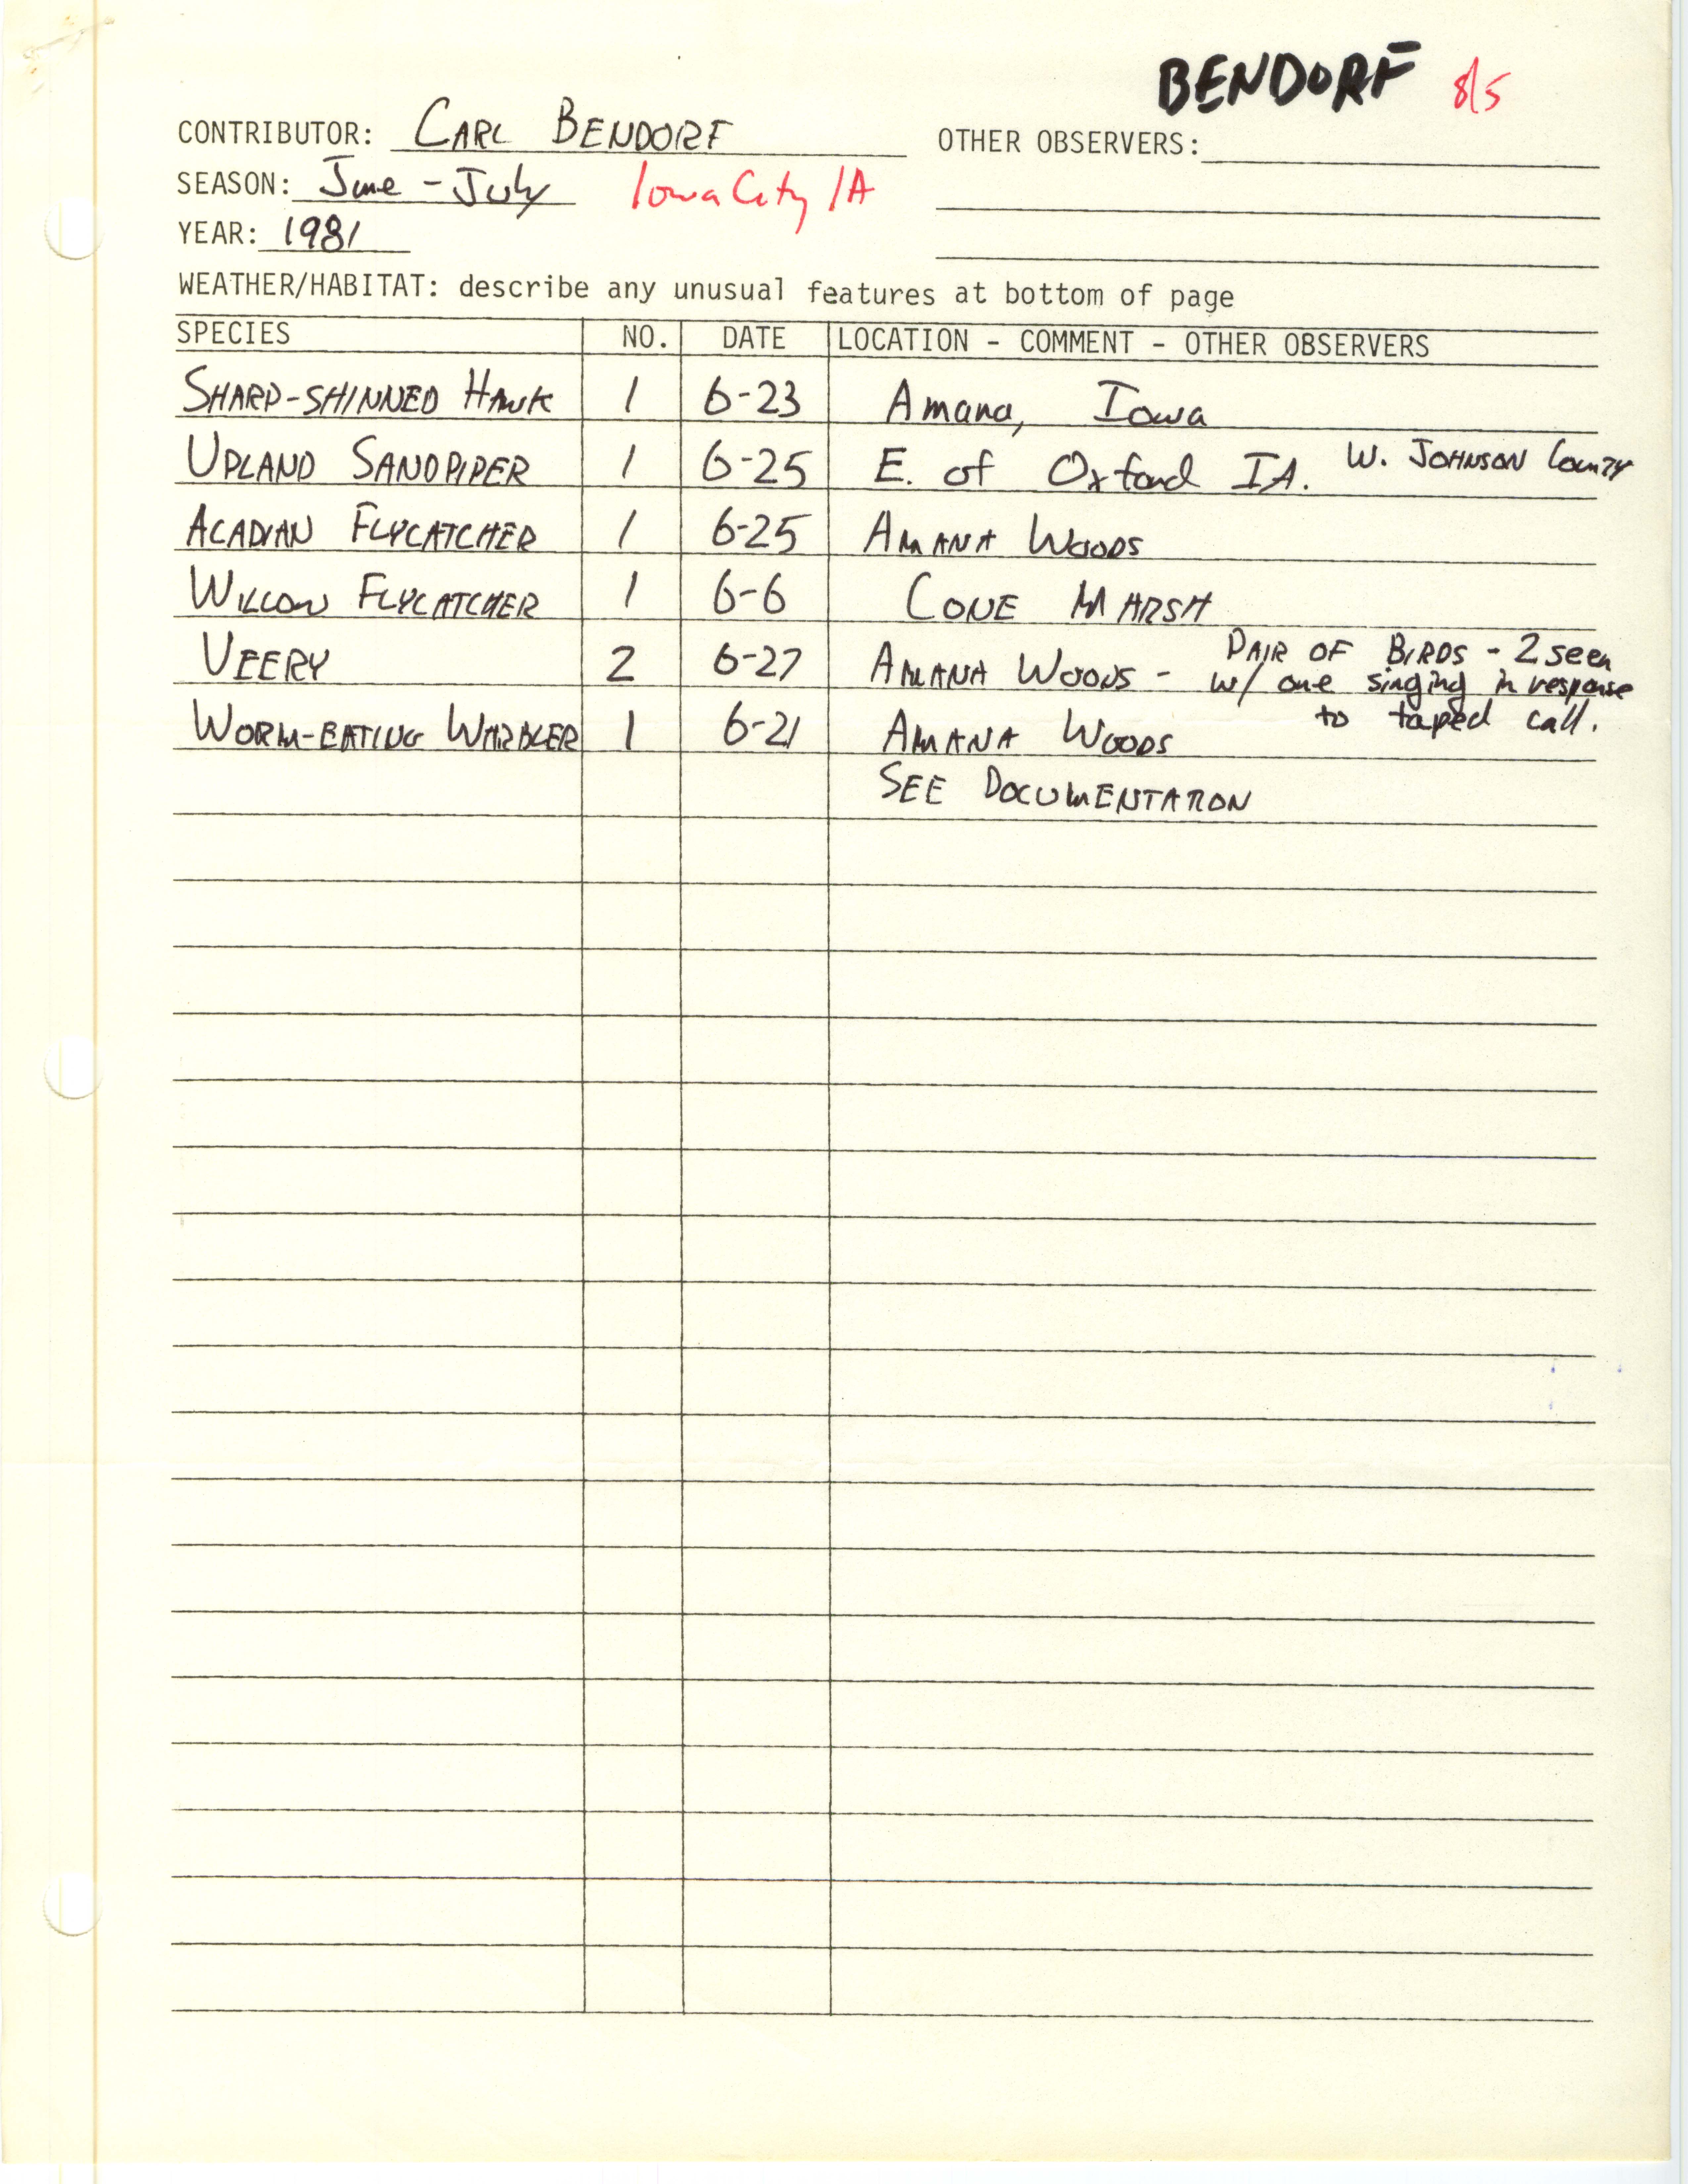 Field notes contributed by Carl J. Bendorf with verifying documentation, summer 1981